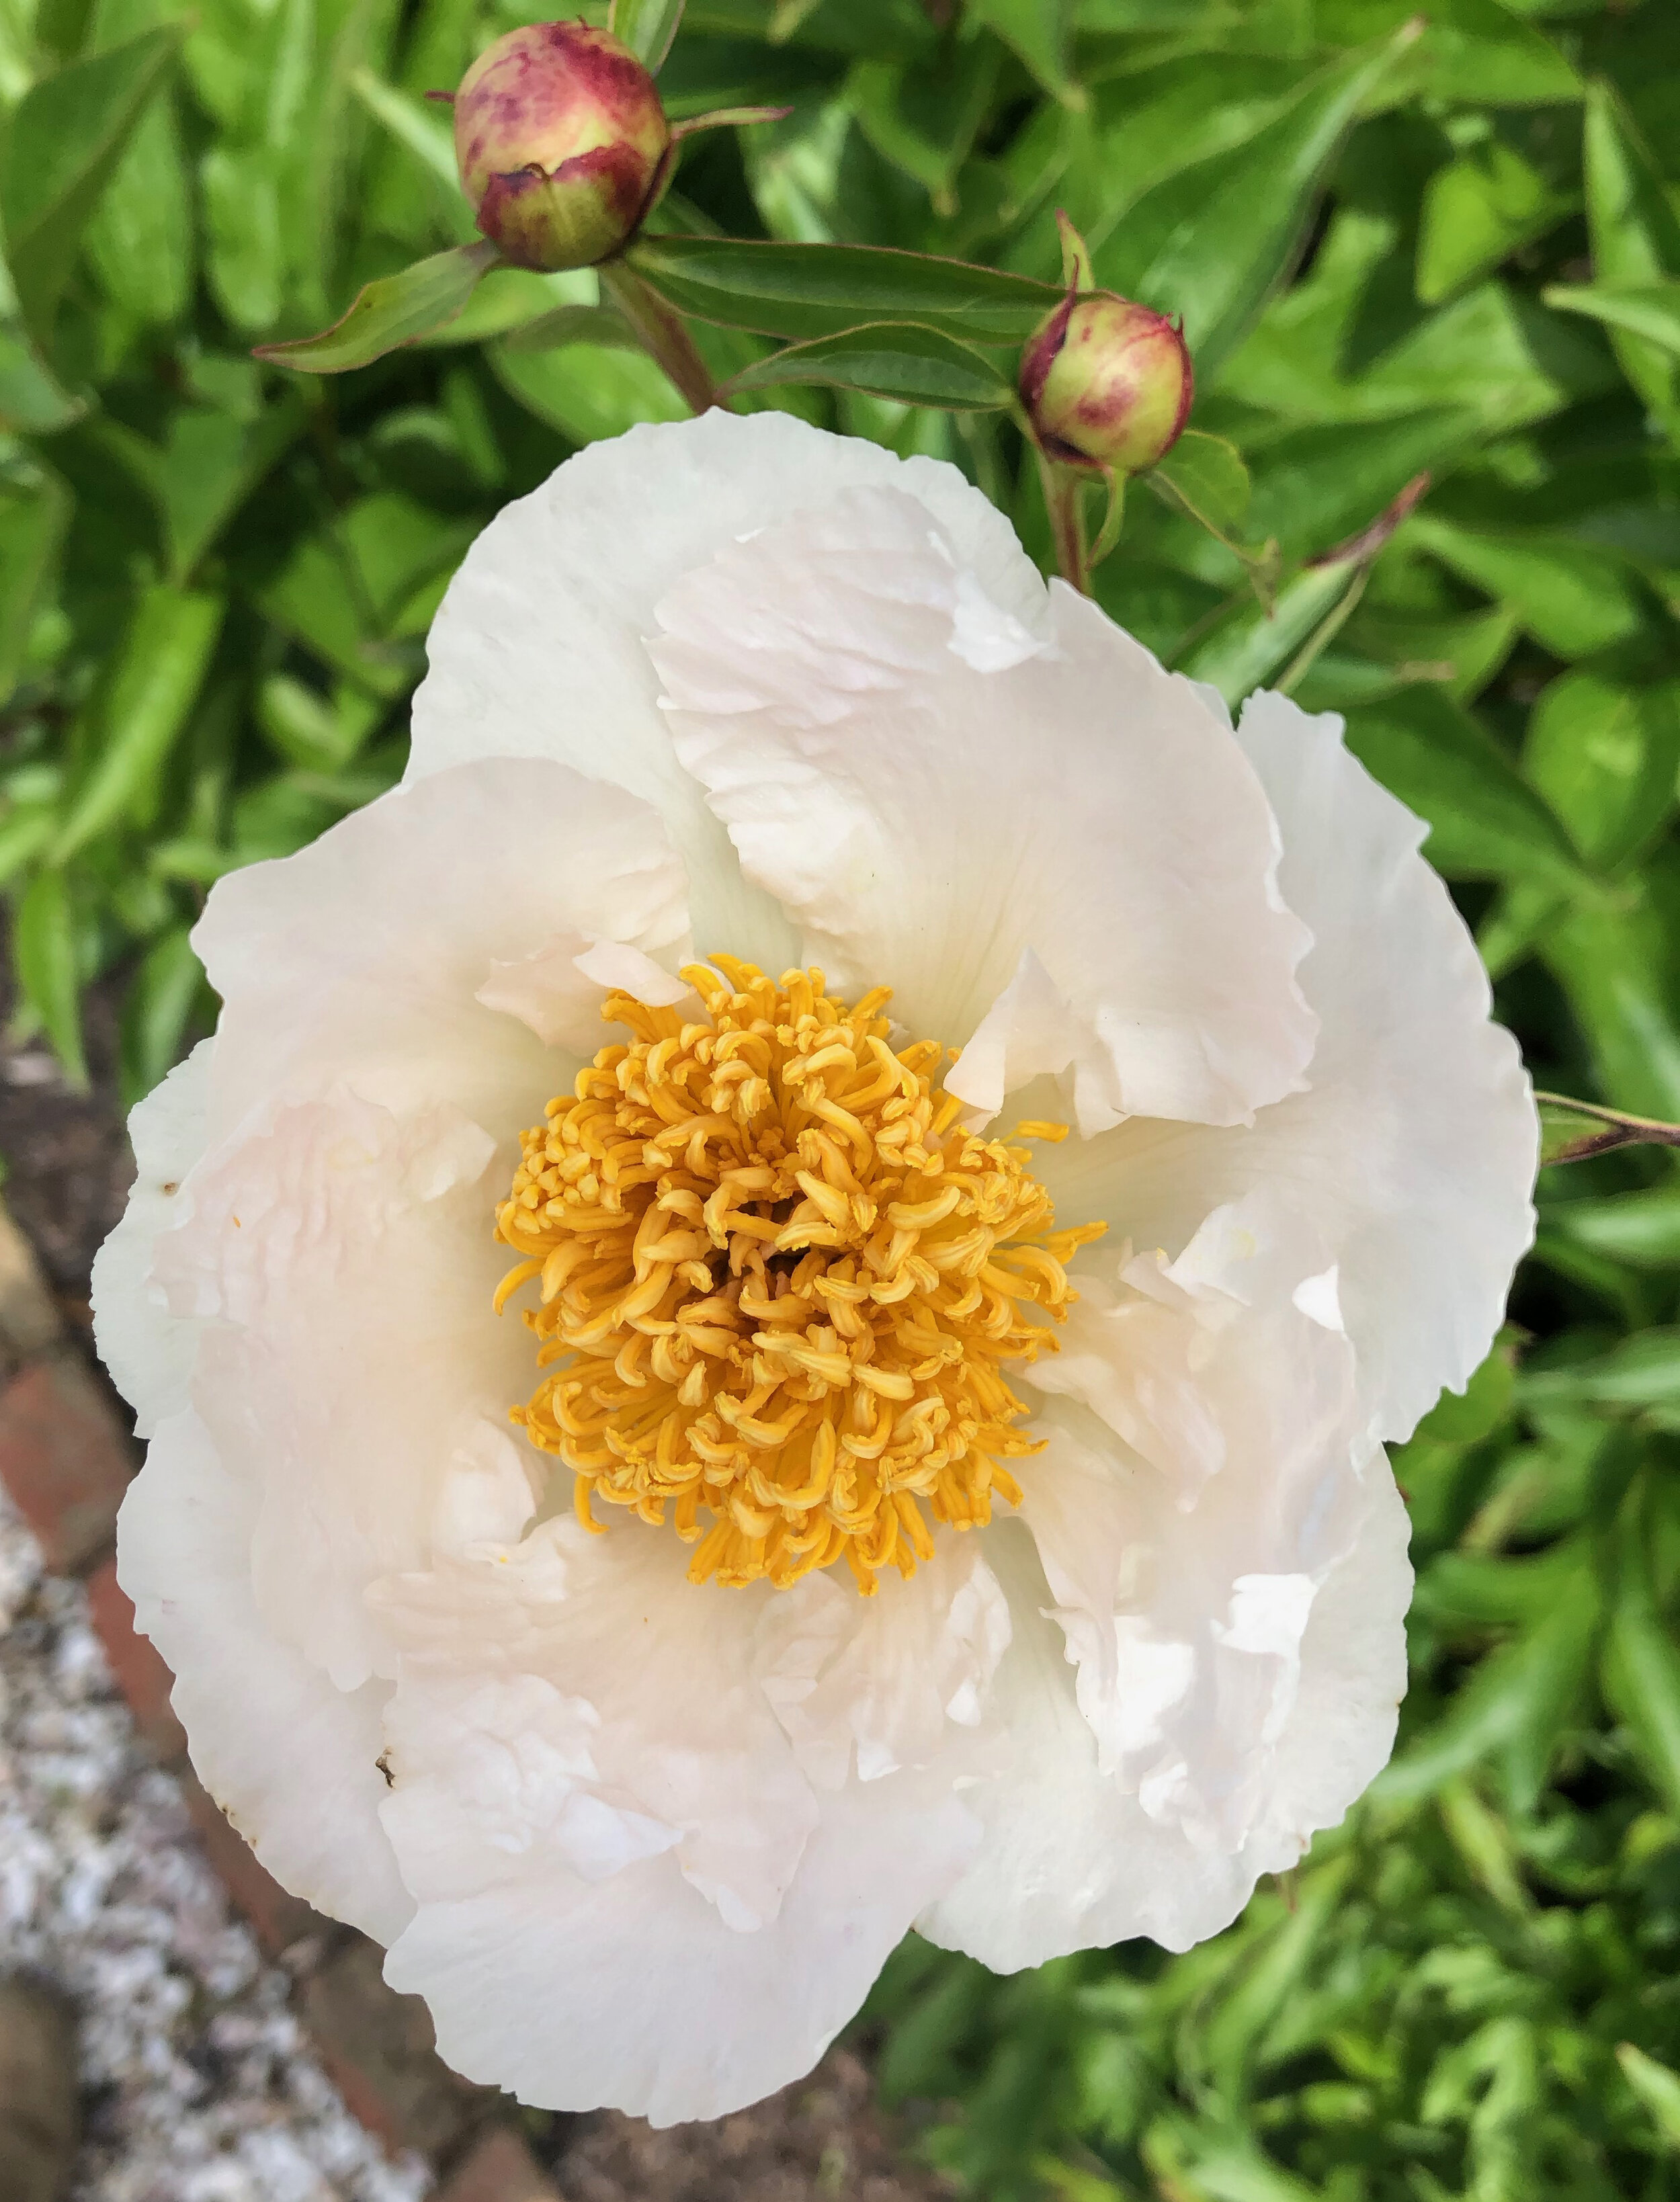  This lovely white anemone style herbaceous peony originated in Mrs. Mellon's cutting garden on the Rokeby Farm. Gardener Todd Lloyd tended to hundreds of colorful peonies, iris, poppies, dahlias and other blooms in the cutting garden there. These lo